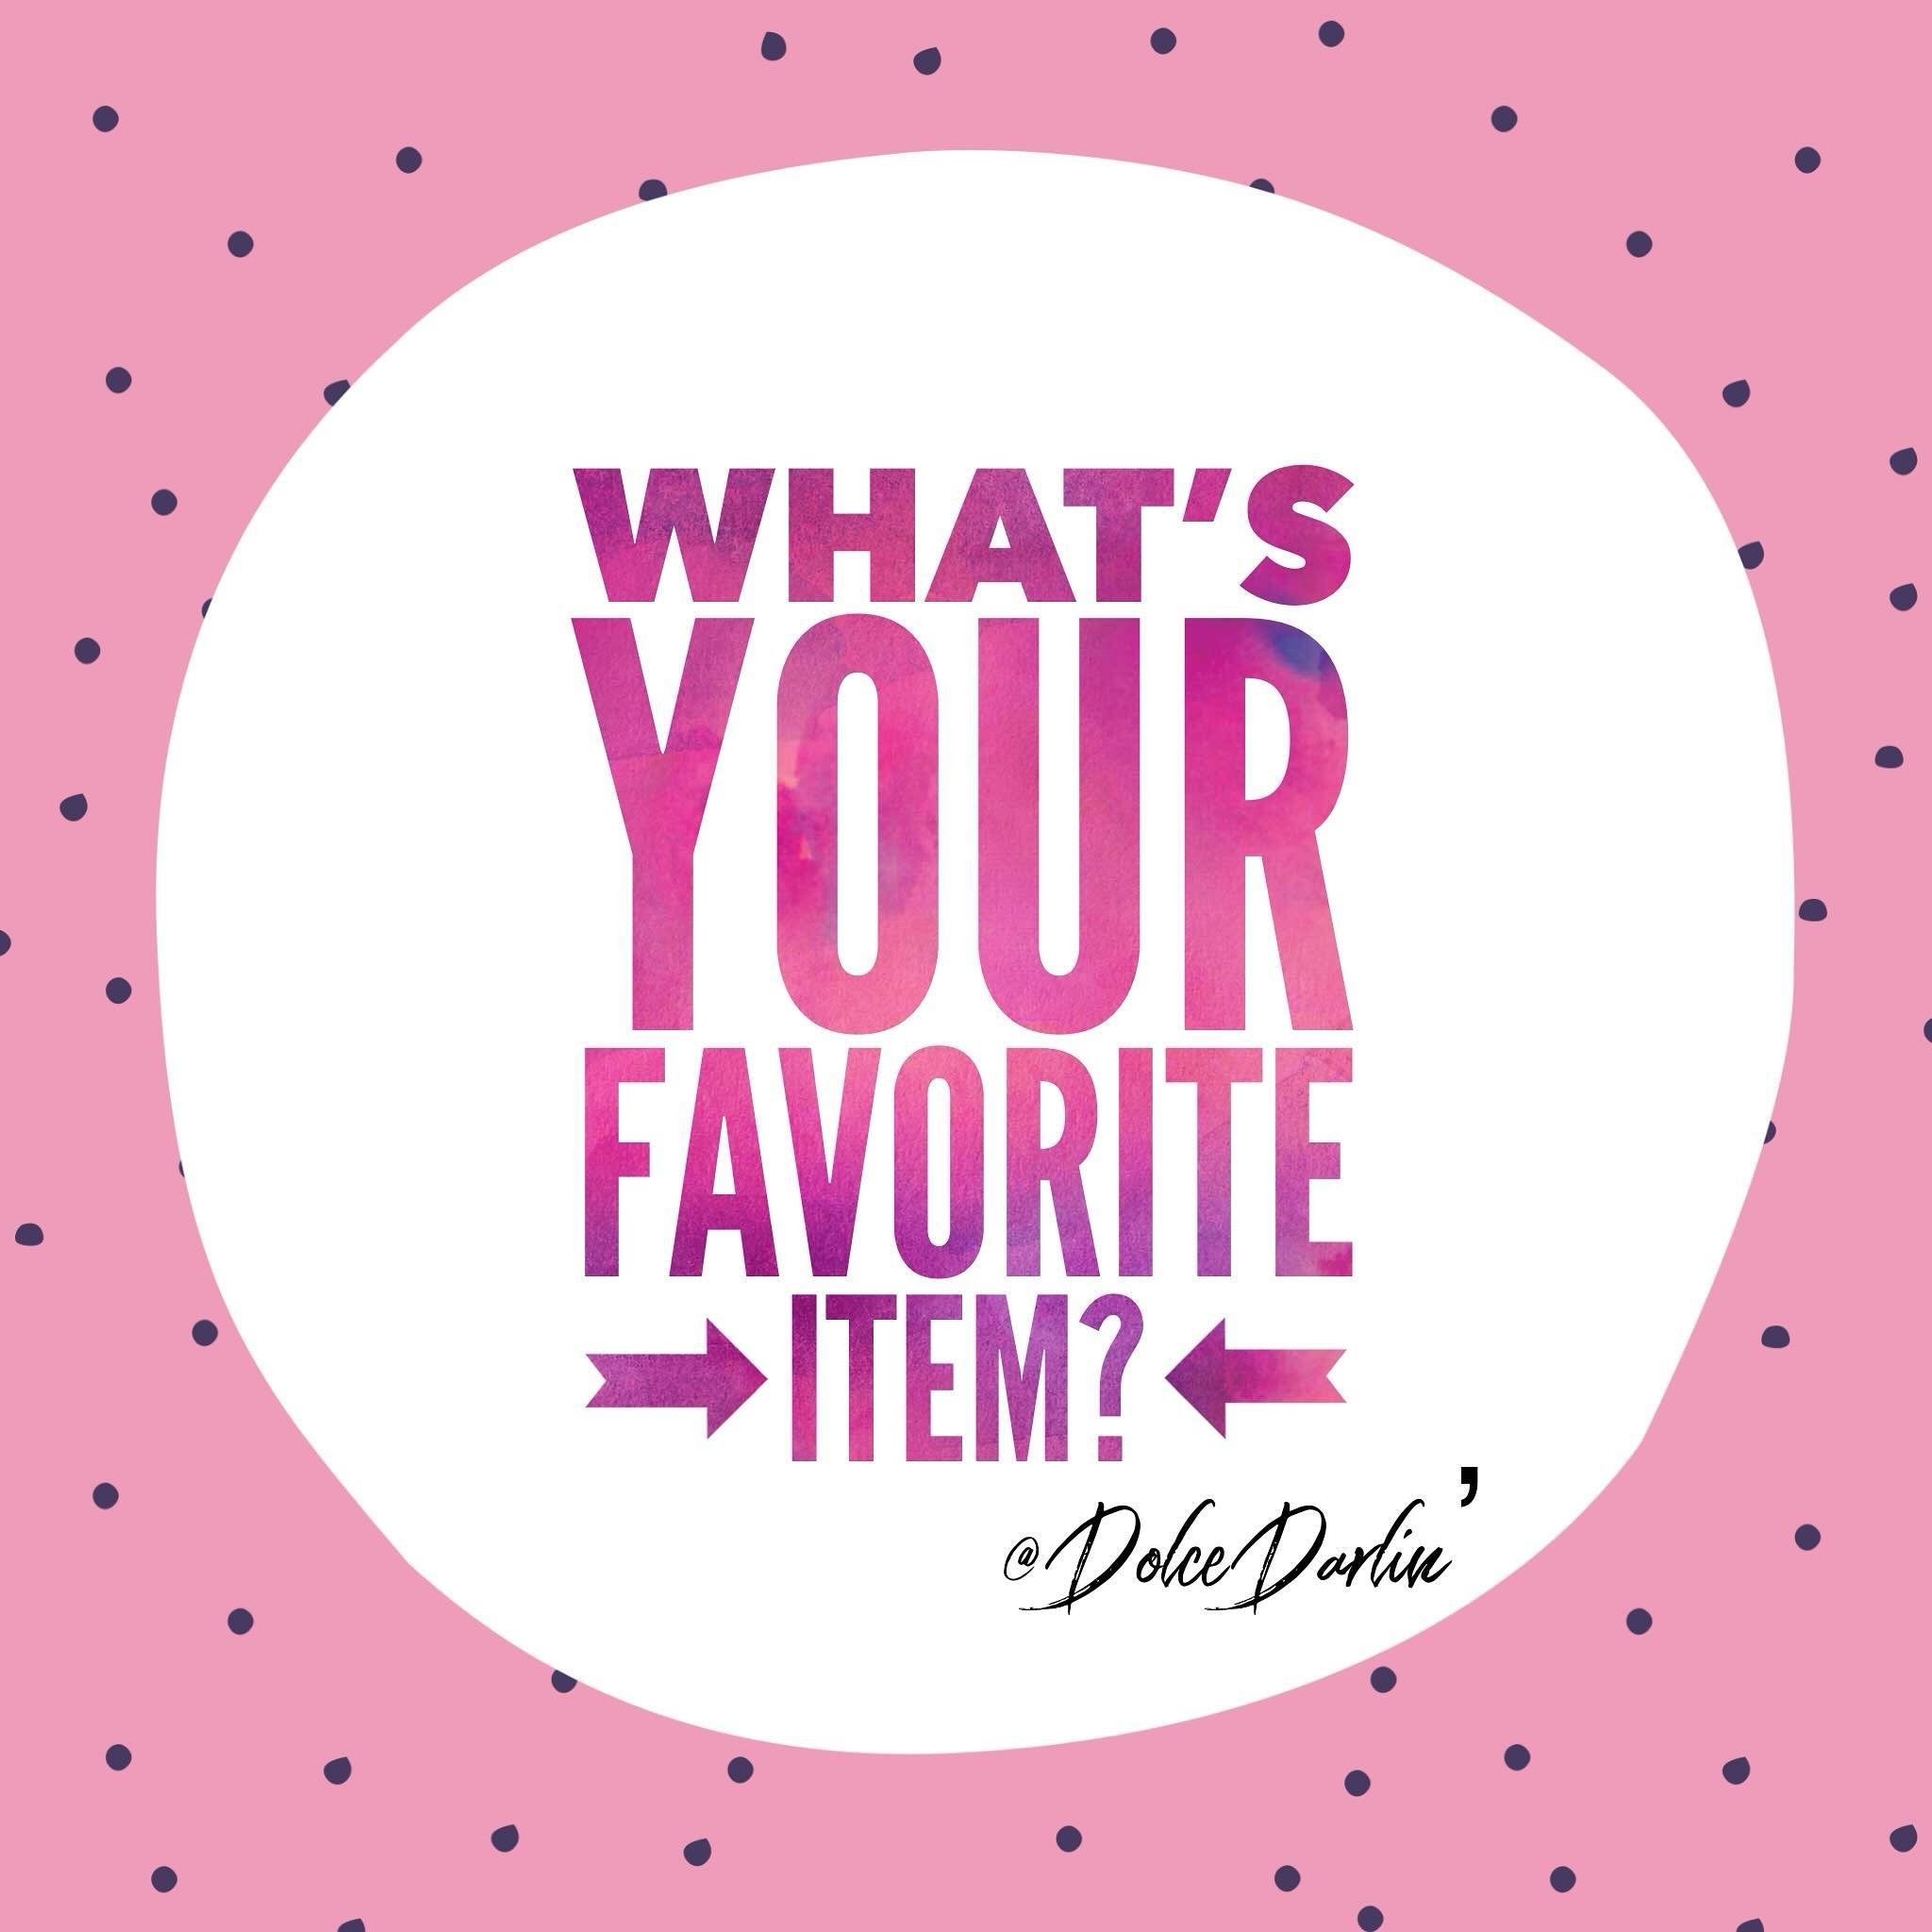 We want our last full menu week to be PACKED with your favorite items!!! 
We just need to know what they are! 
Comment below and we&rsquo;ll do our best to get the favorites available for y&rsquo;all! 🥰🥰🥰